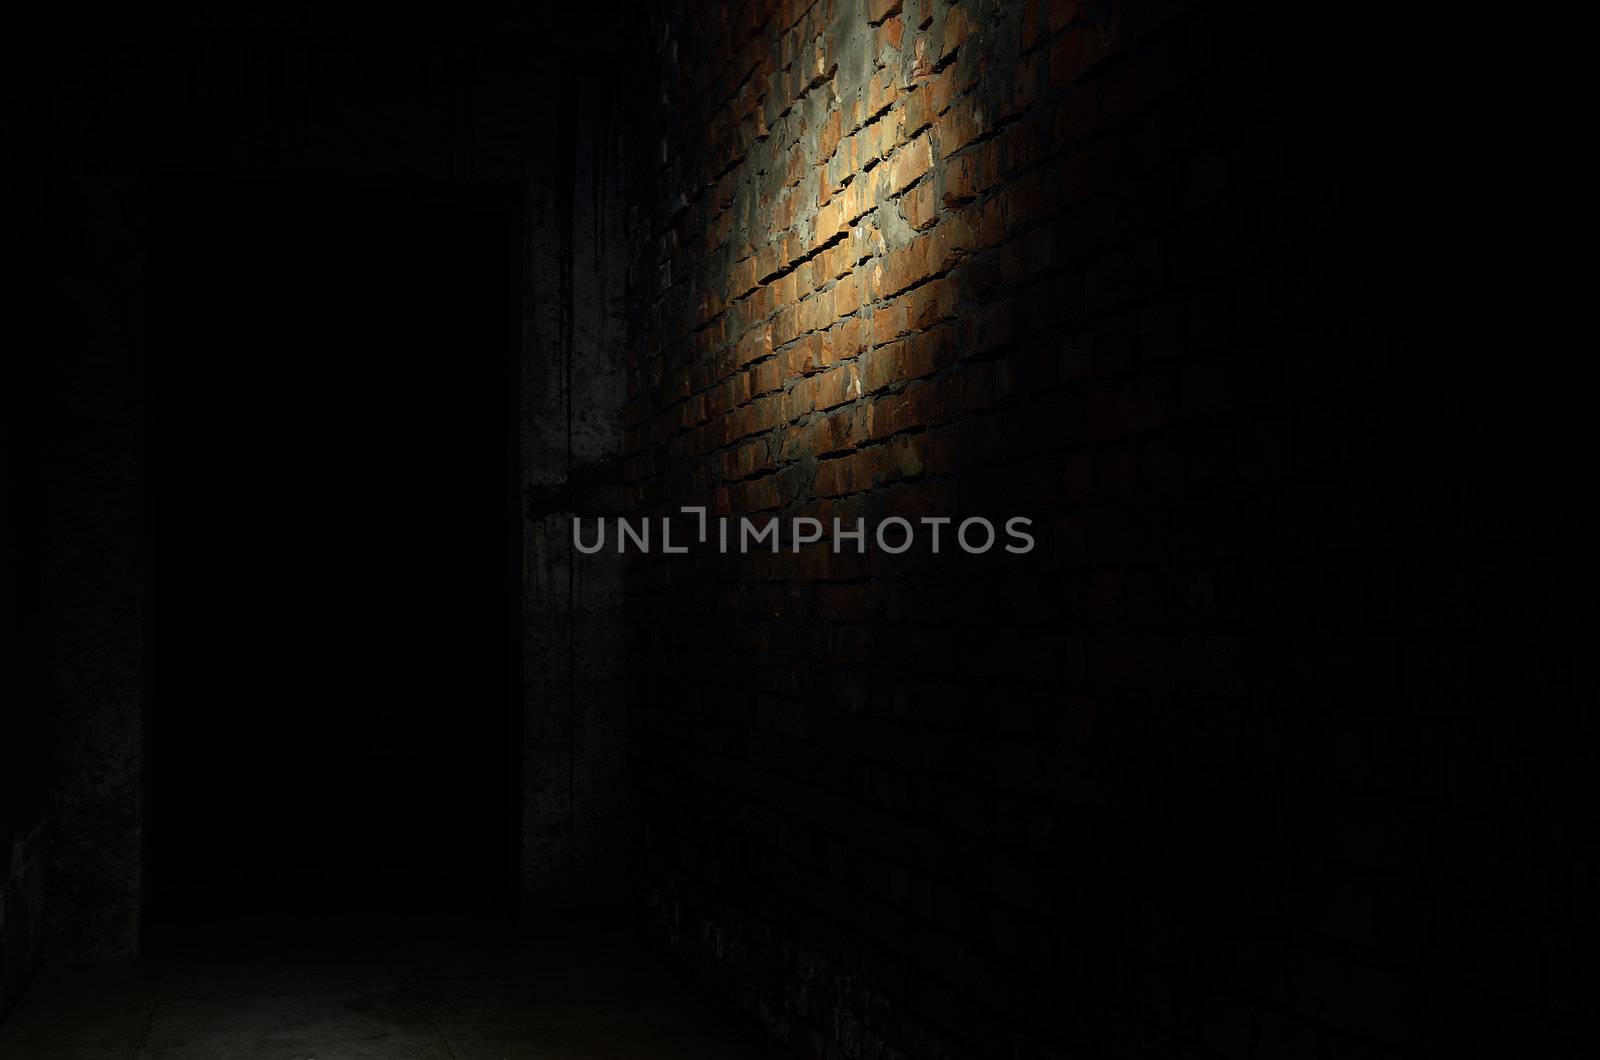 Photo of the bricky wall in the darkness